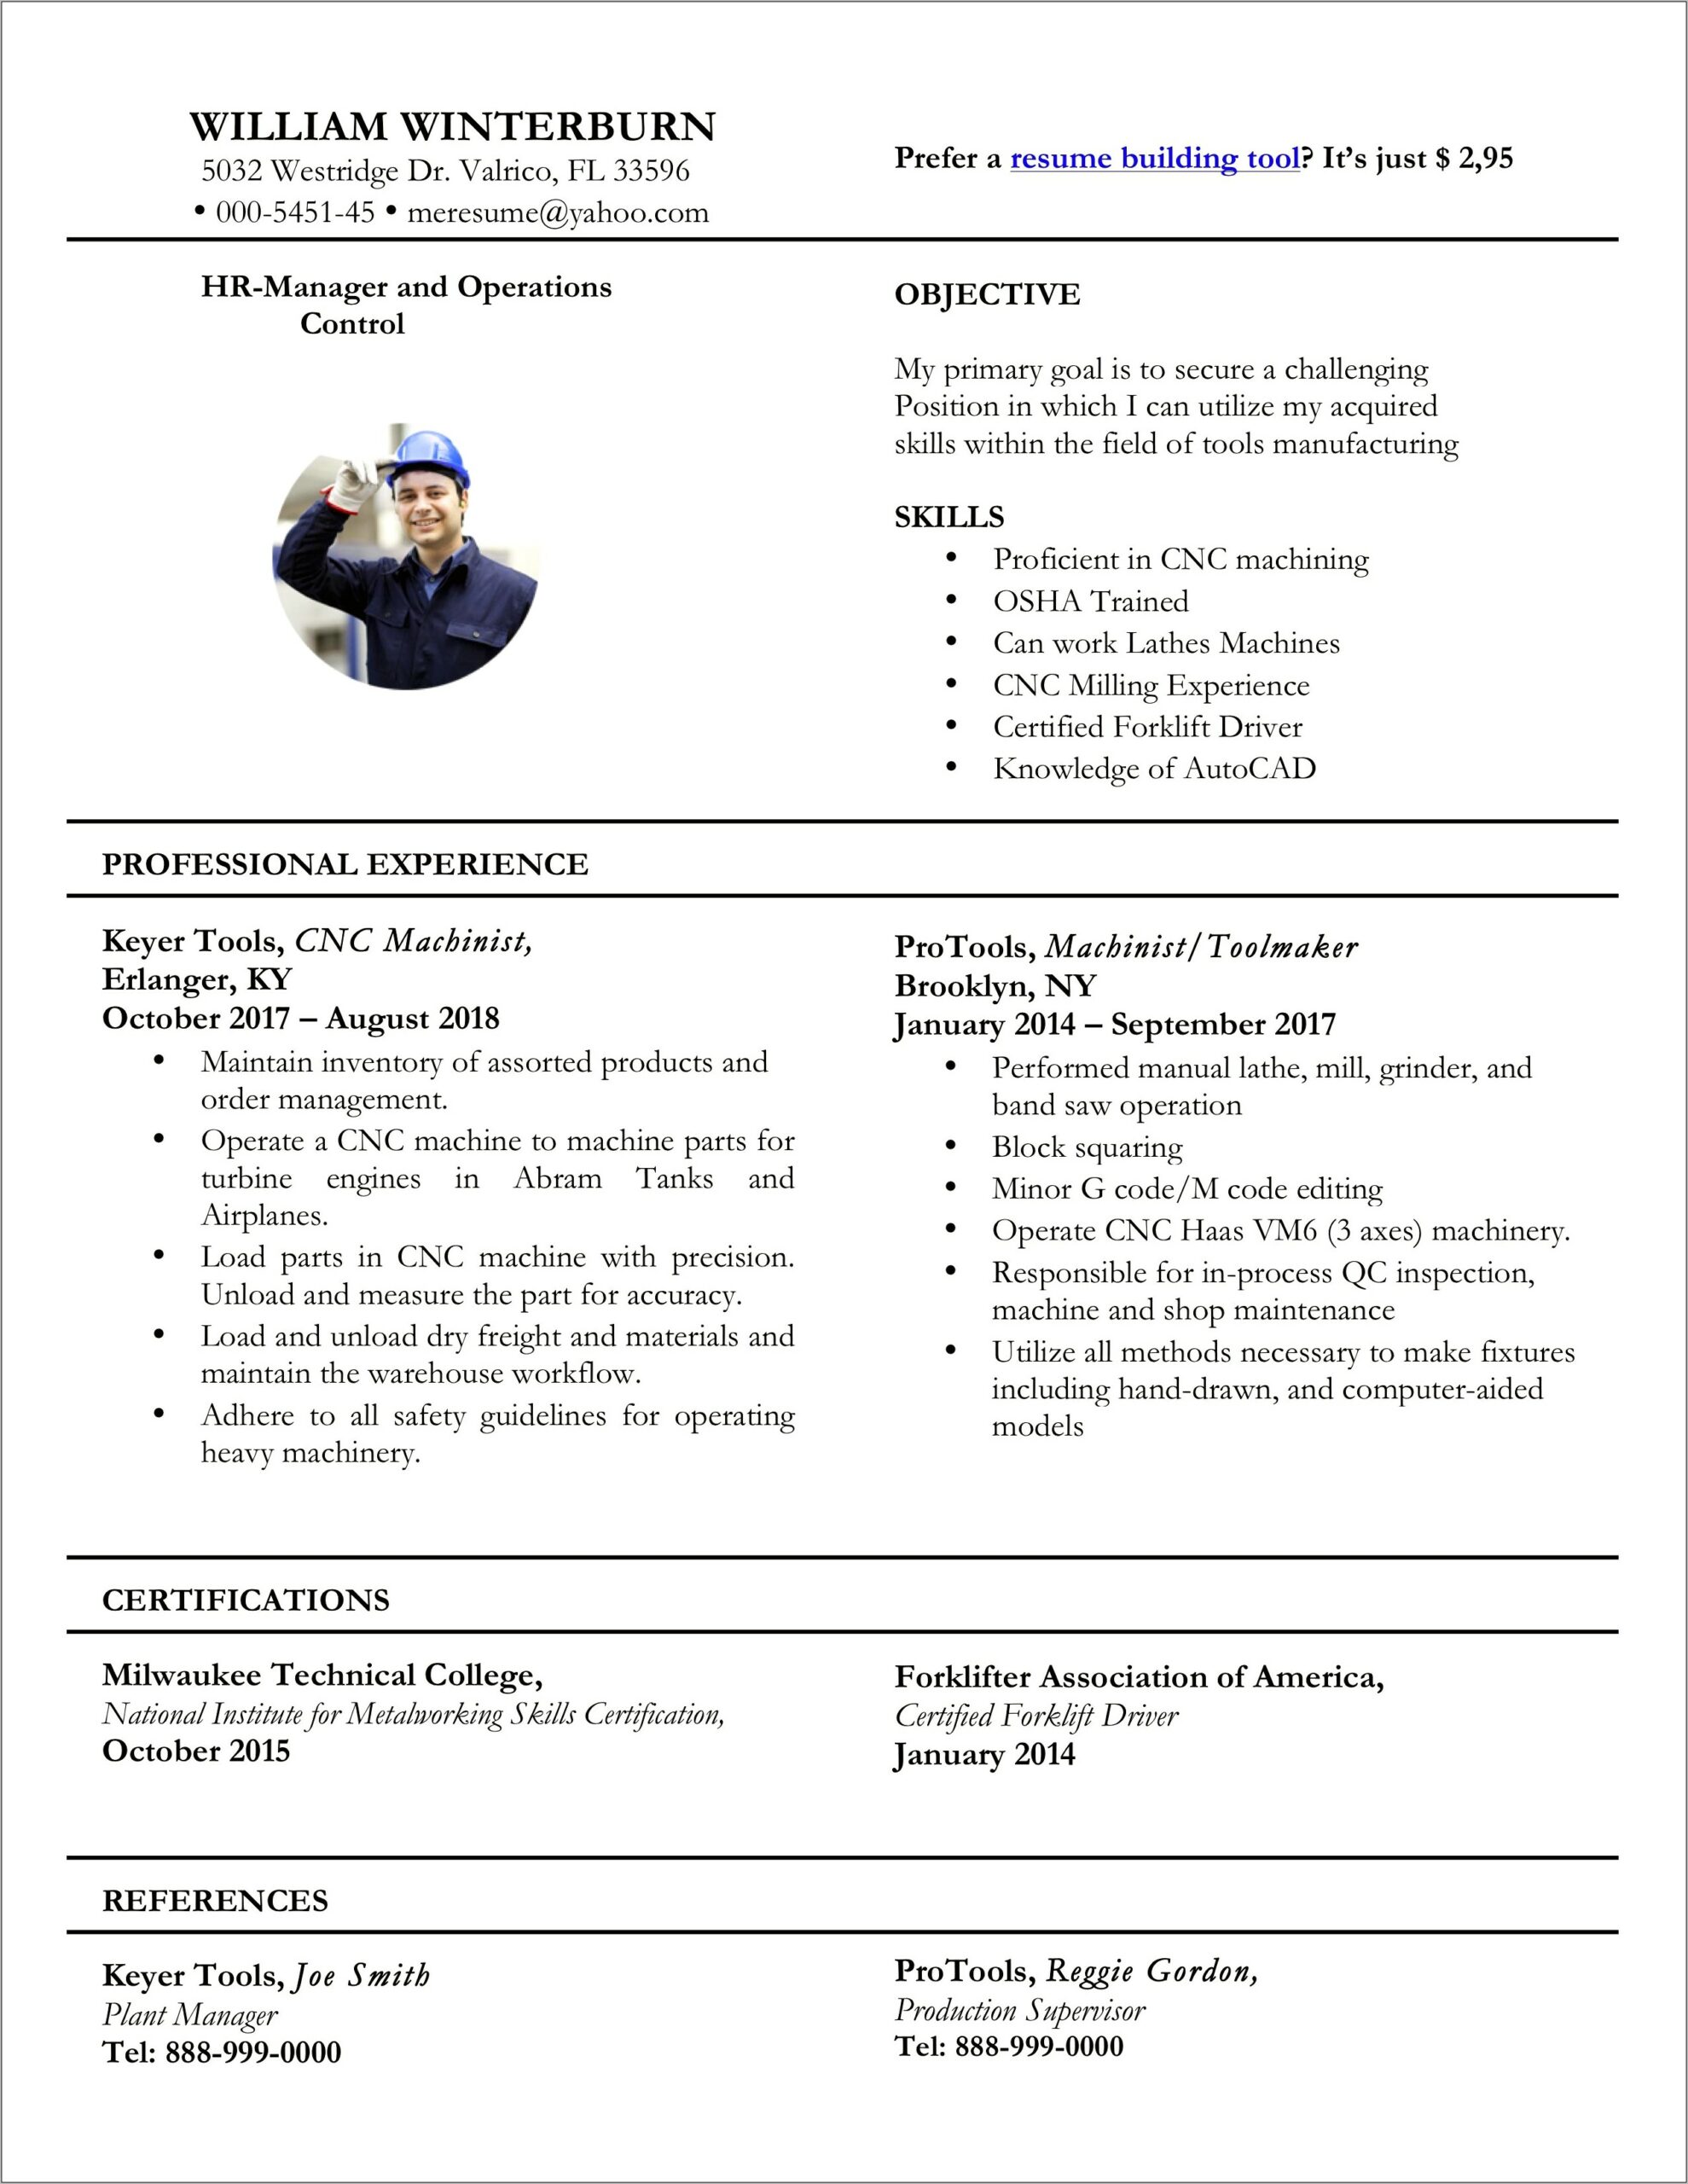 Resume Writing Tips And Samples Pdf